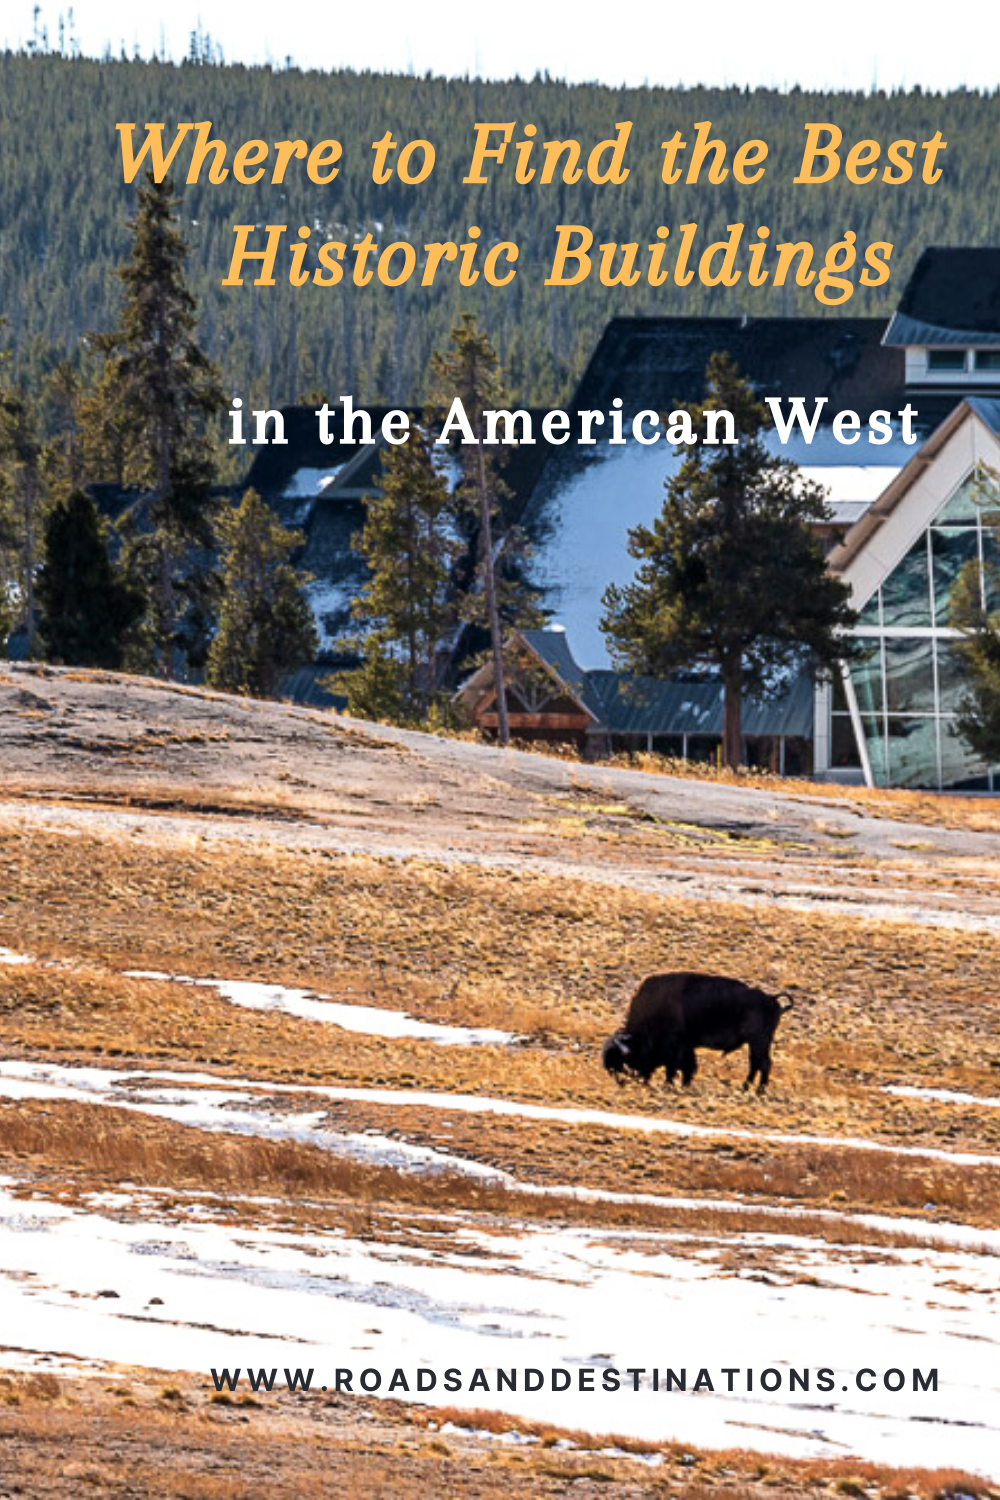 Historic Buildings in the American West - Roads and Destinations, roadsanddestinations.com.